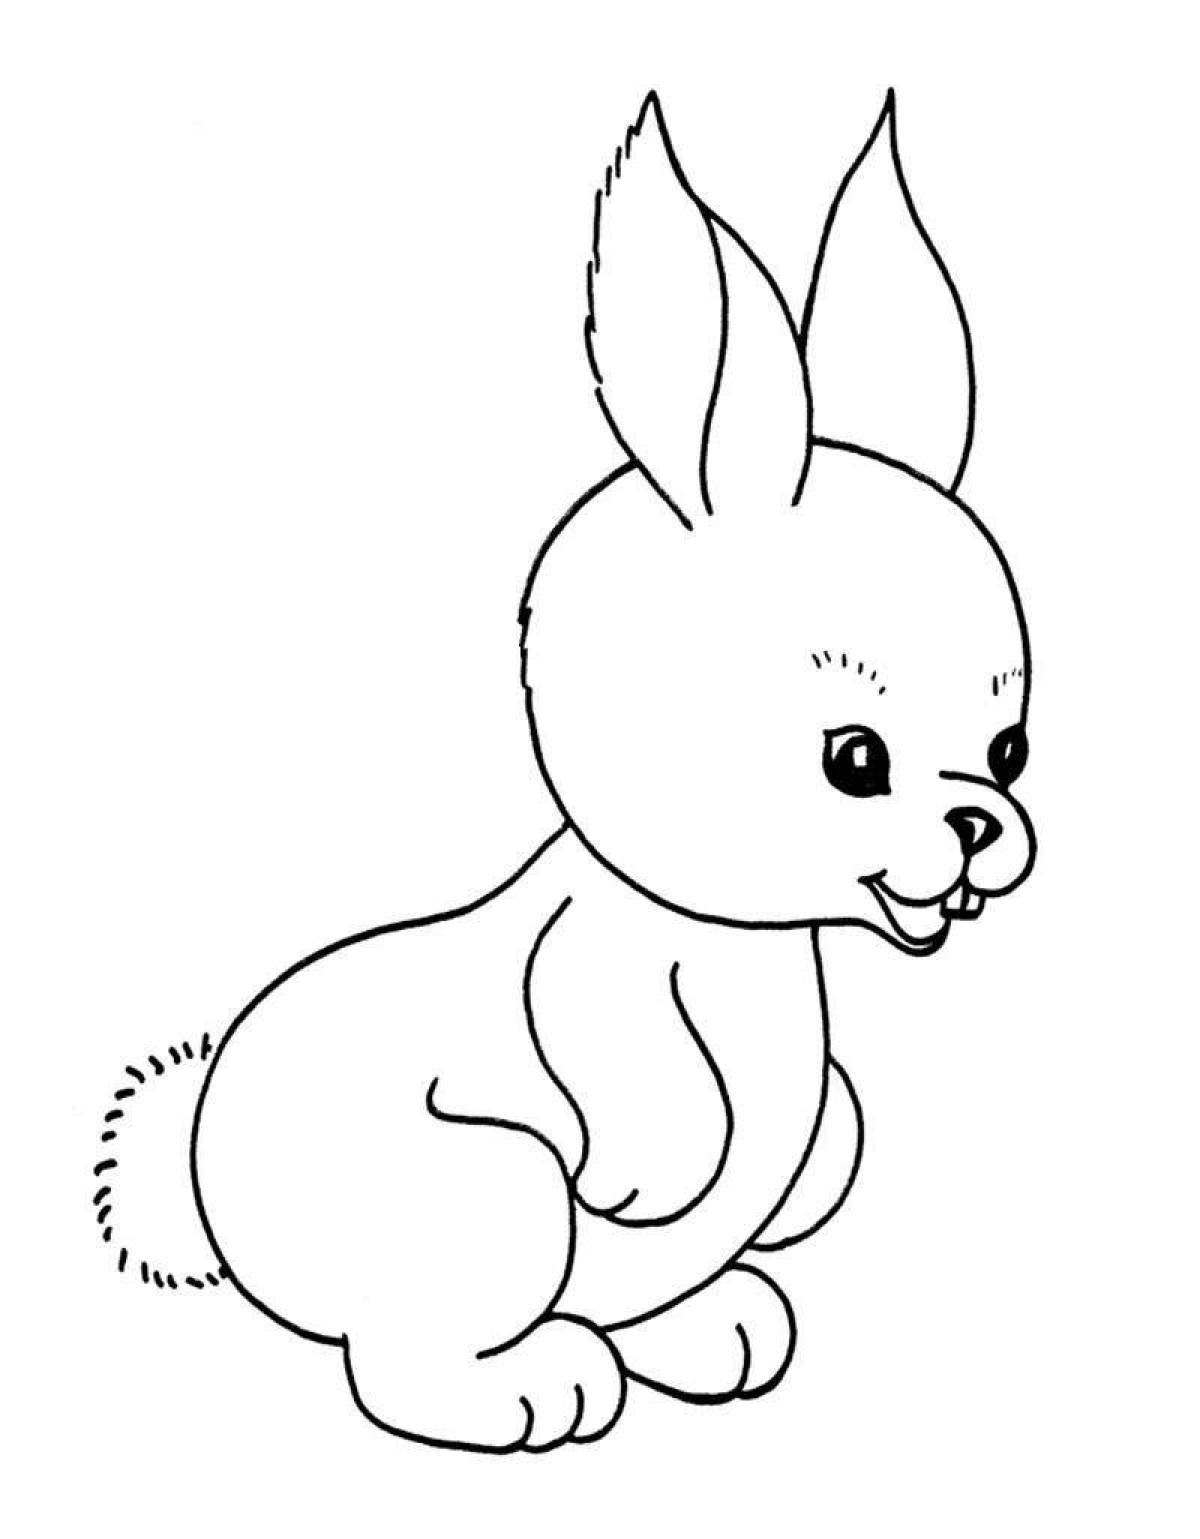 Coloring happy hare for kids